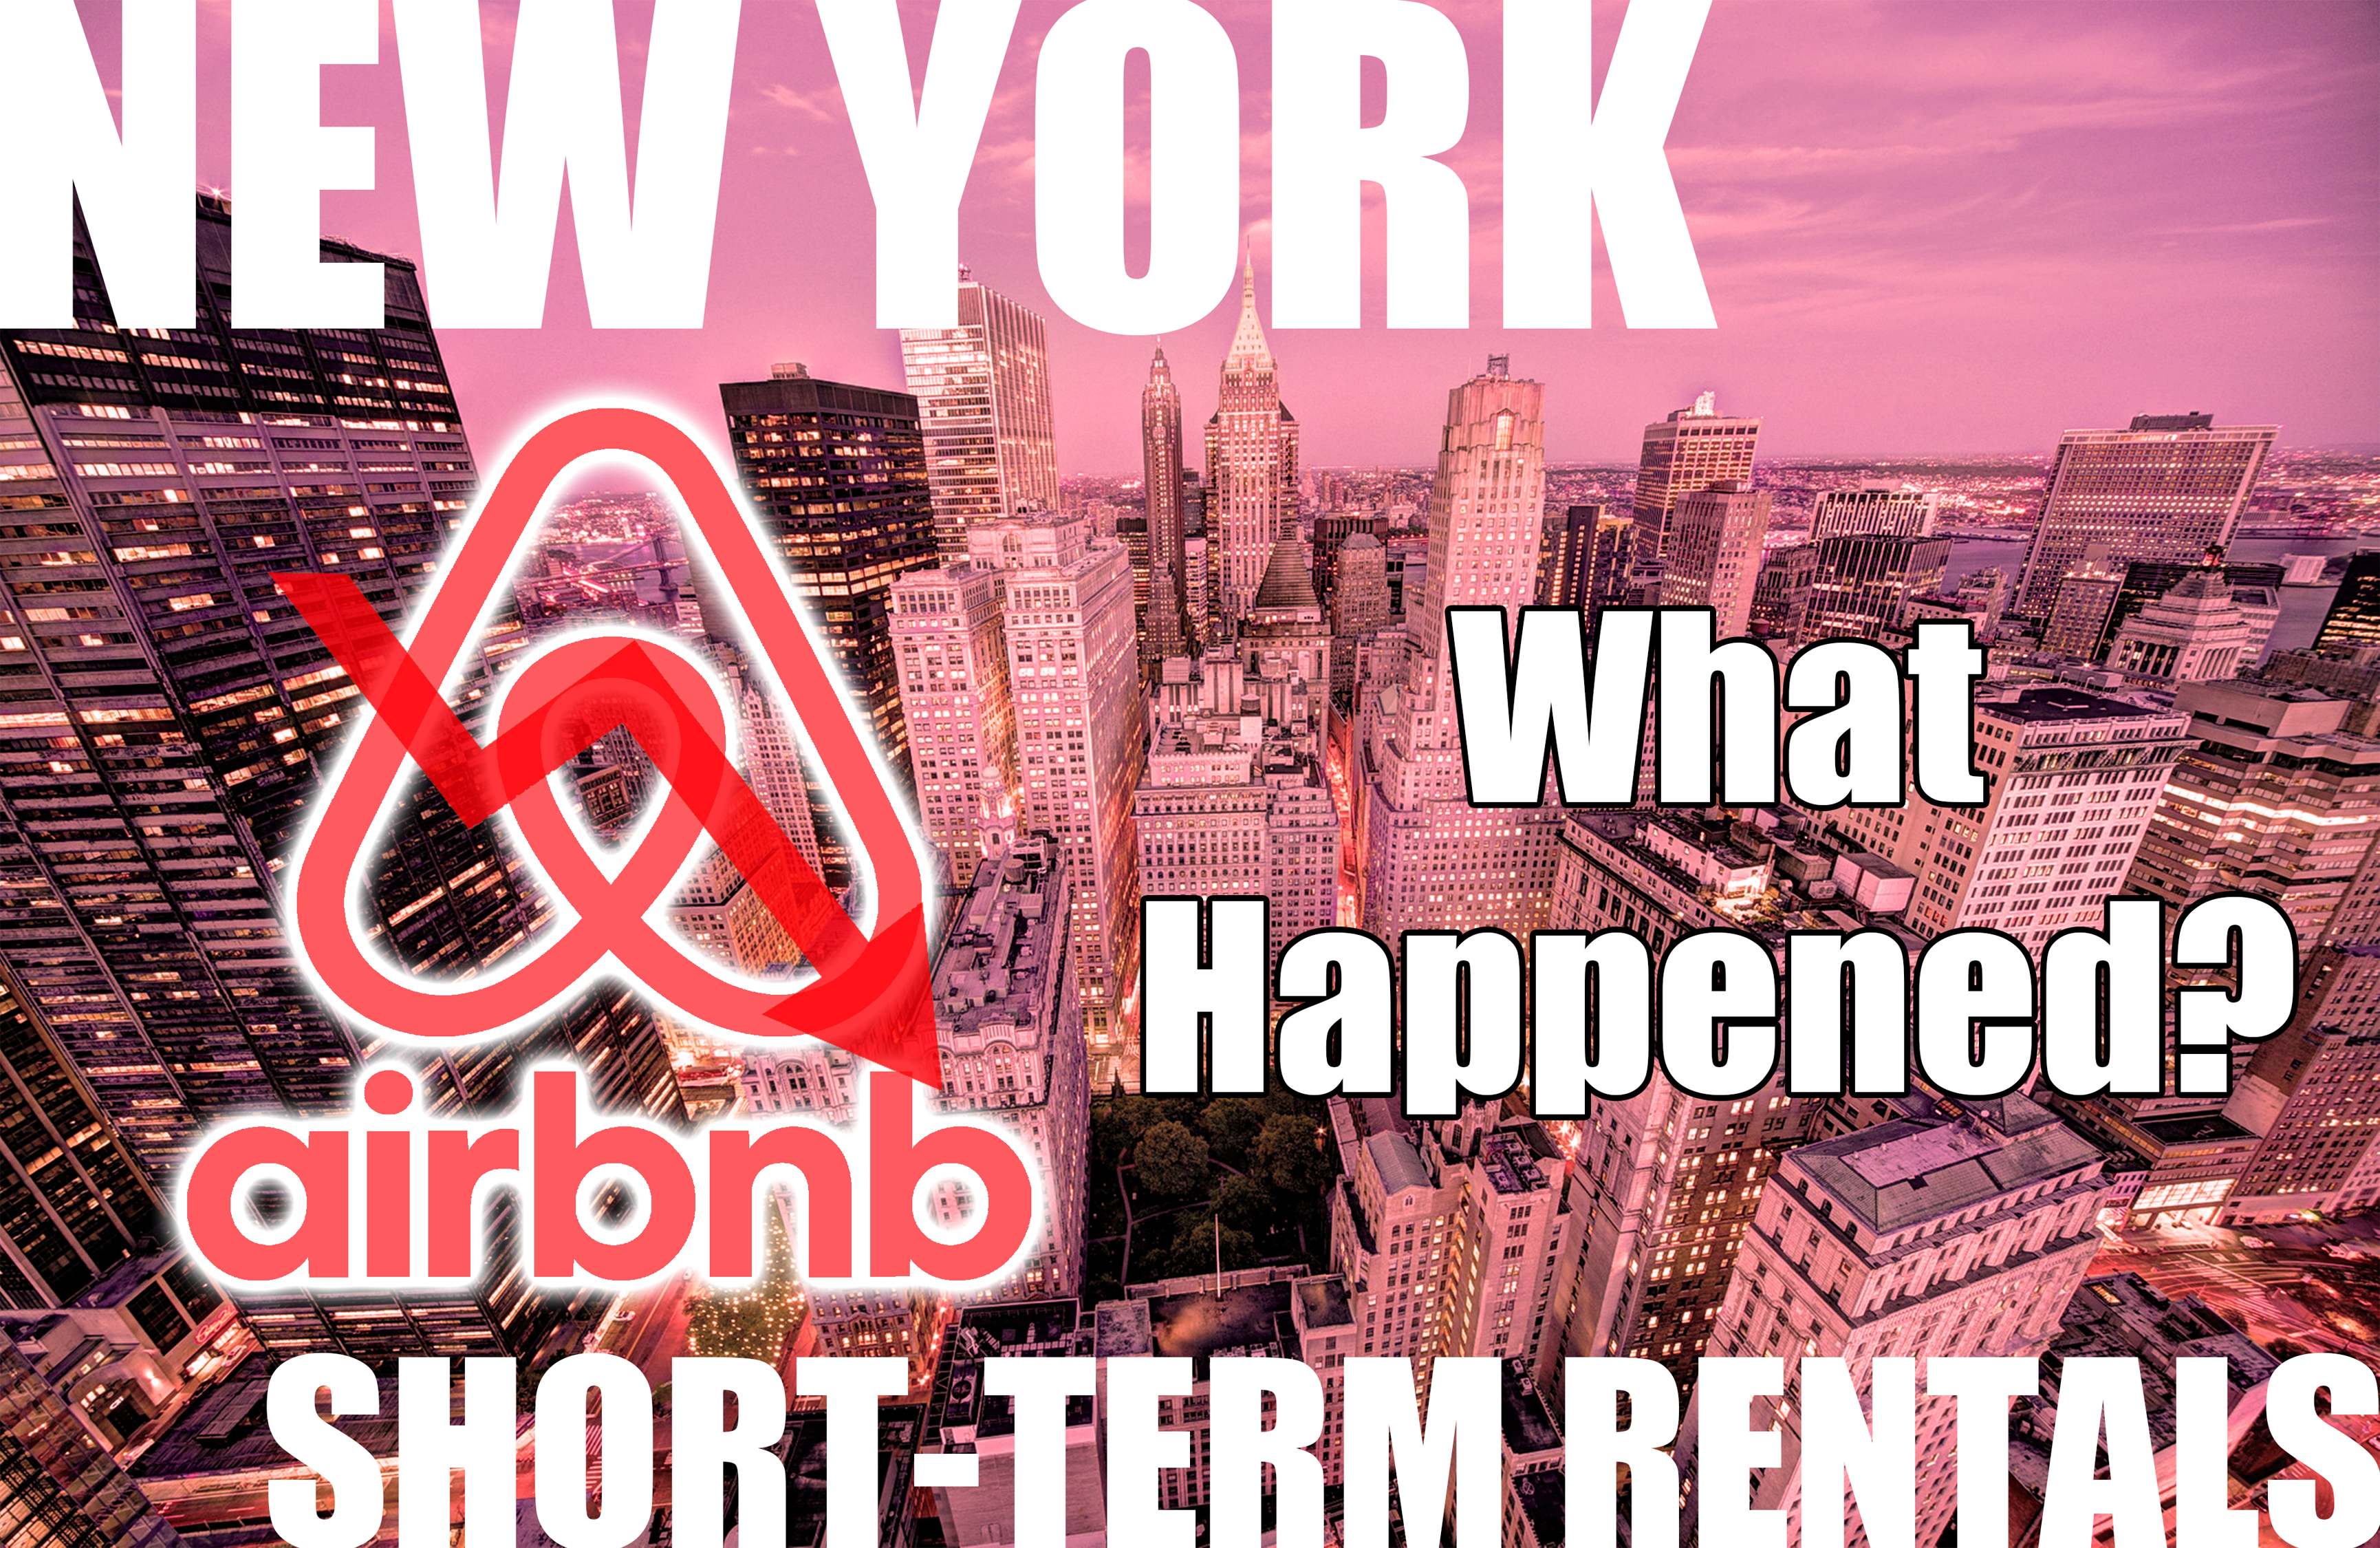 AirBnB in New York: What Happened?